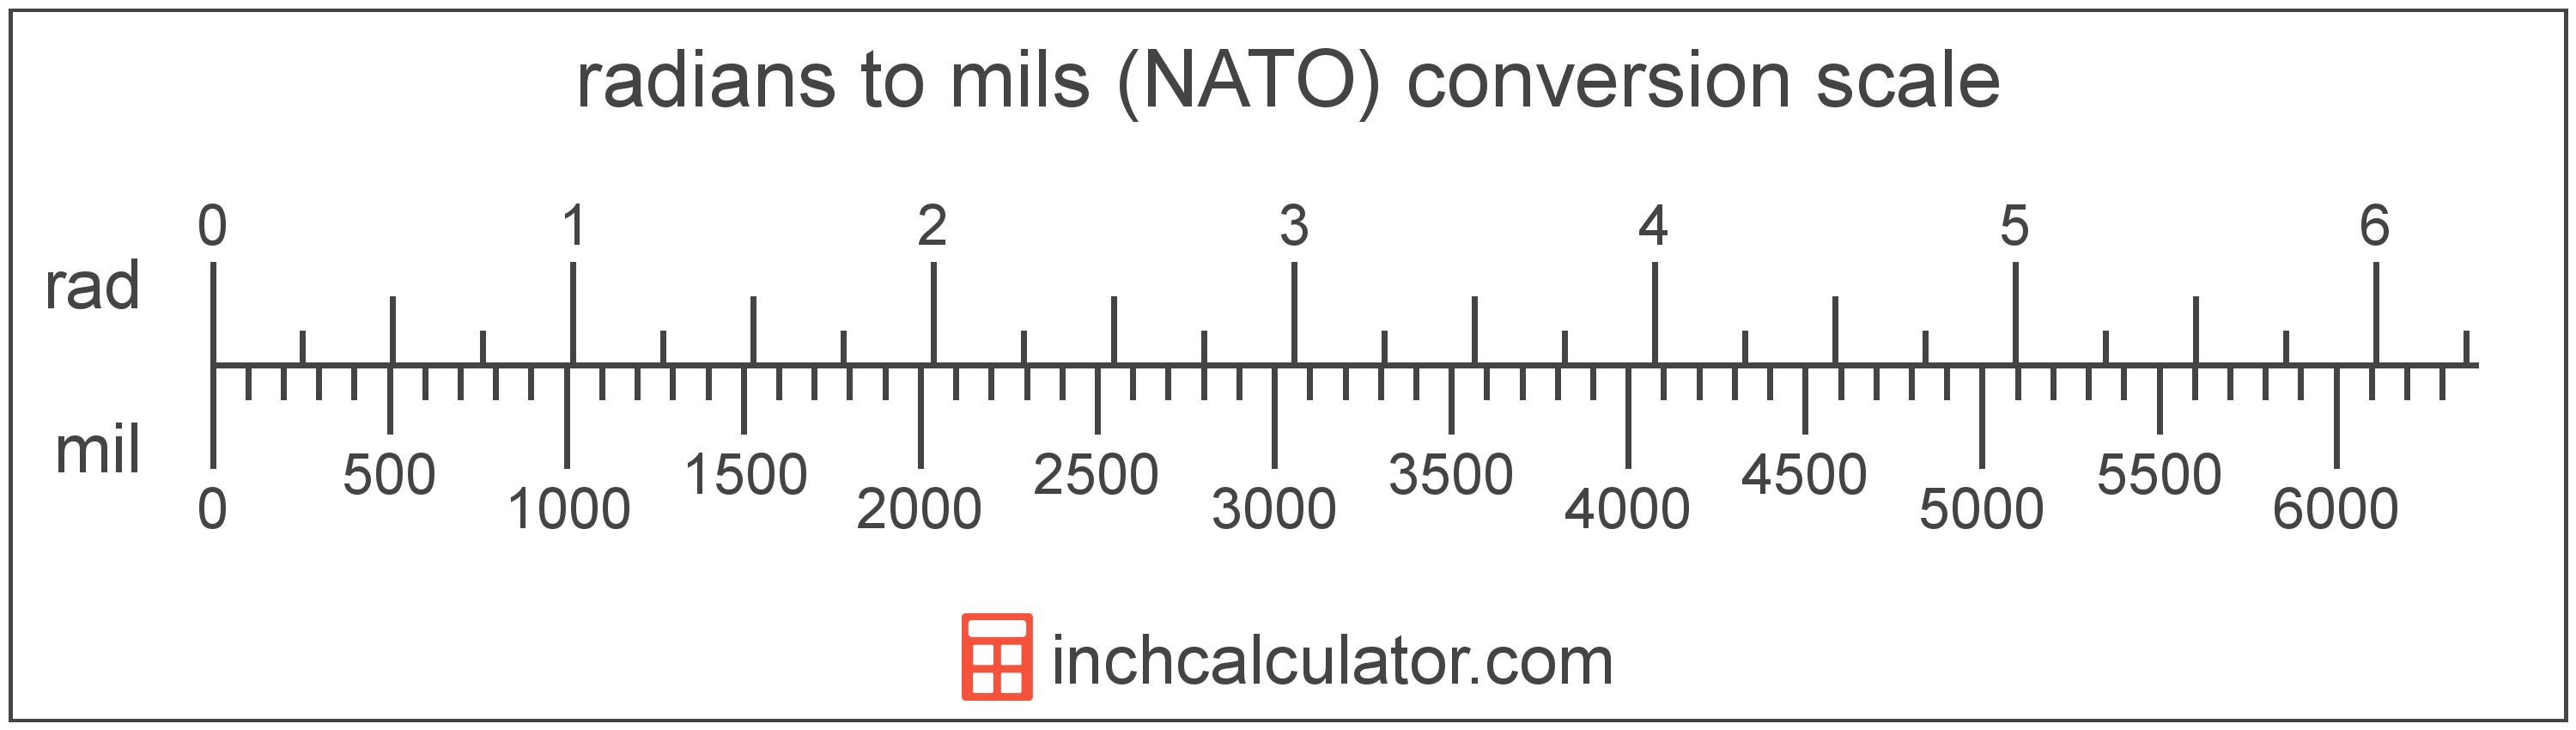 conversion scale showing radians and equivalent mils angle values